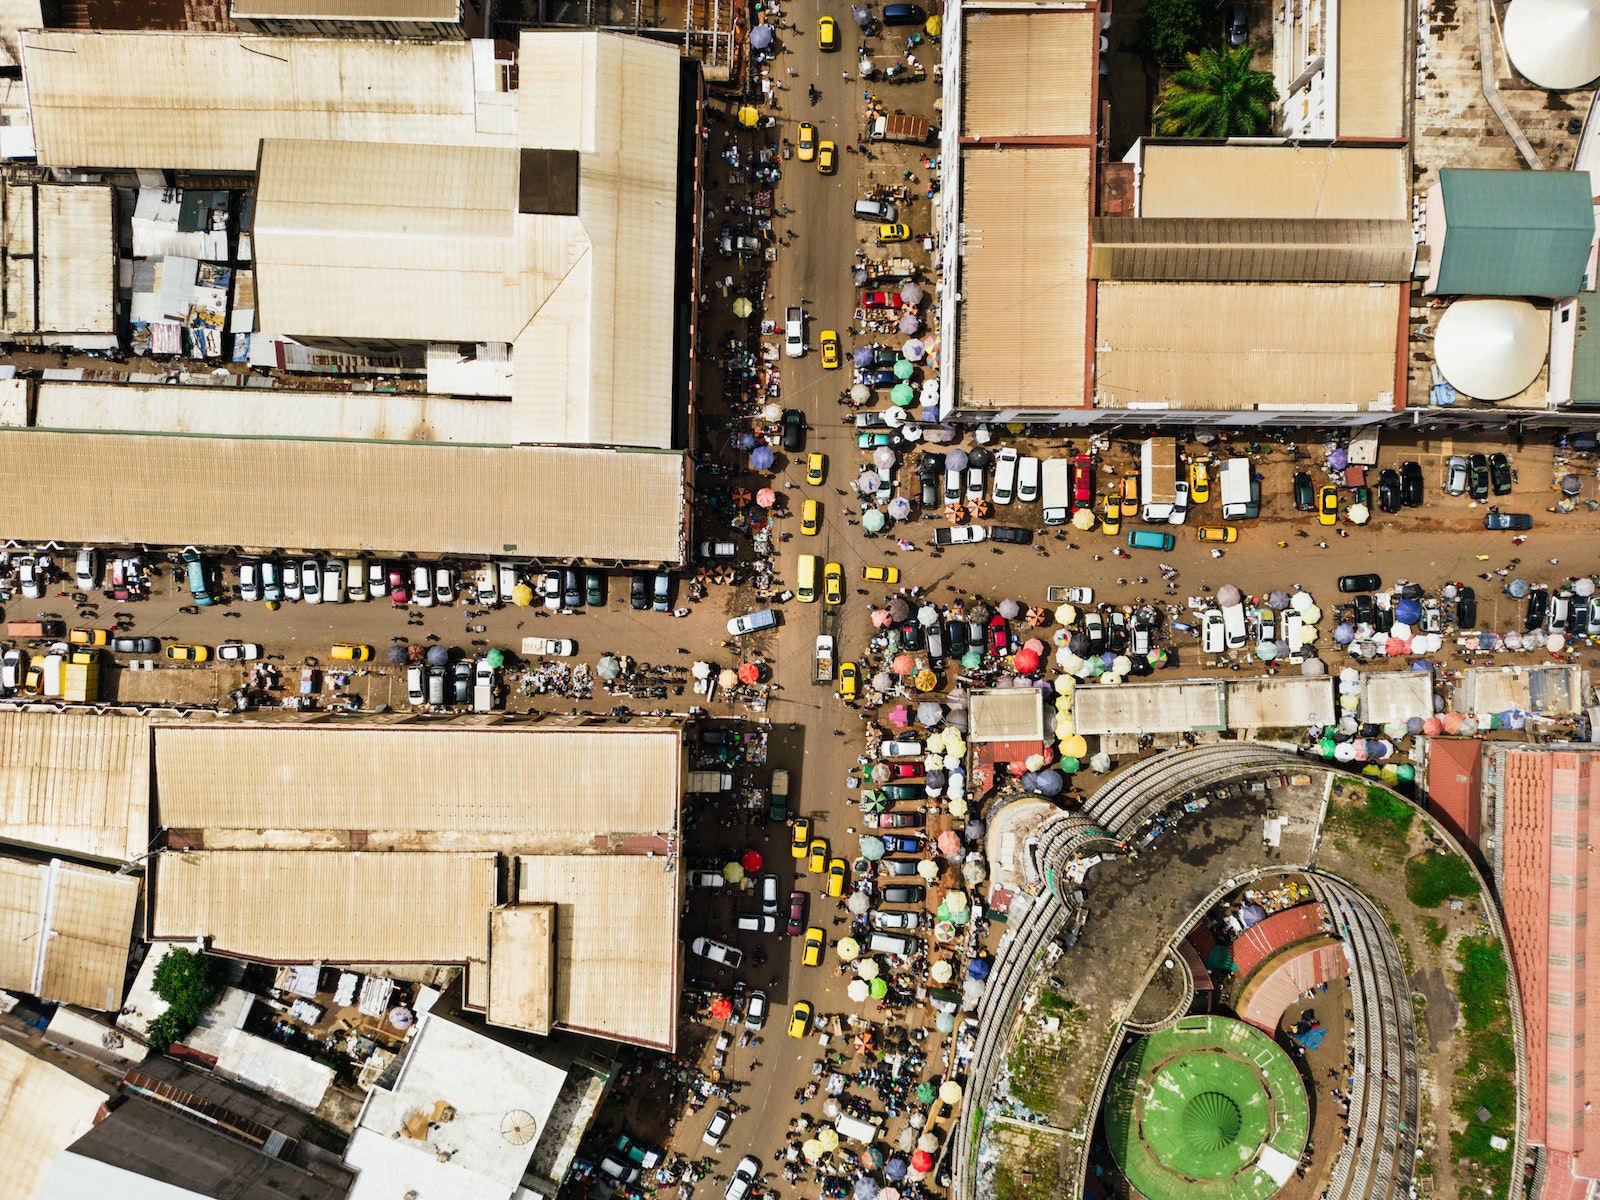 Crowded Street in africa